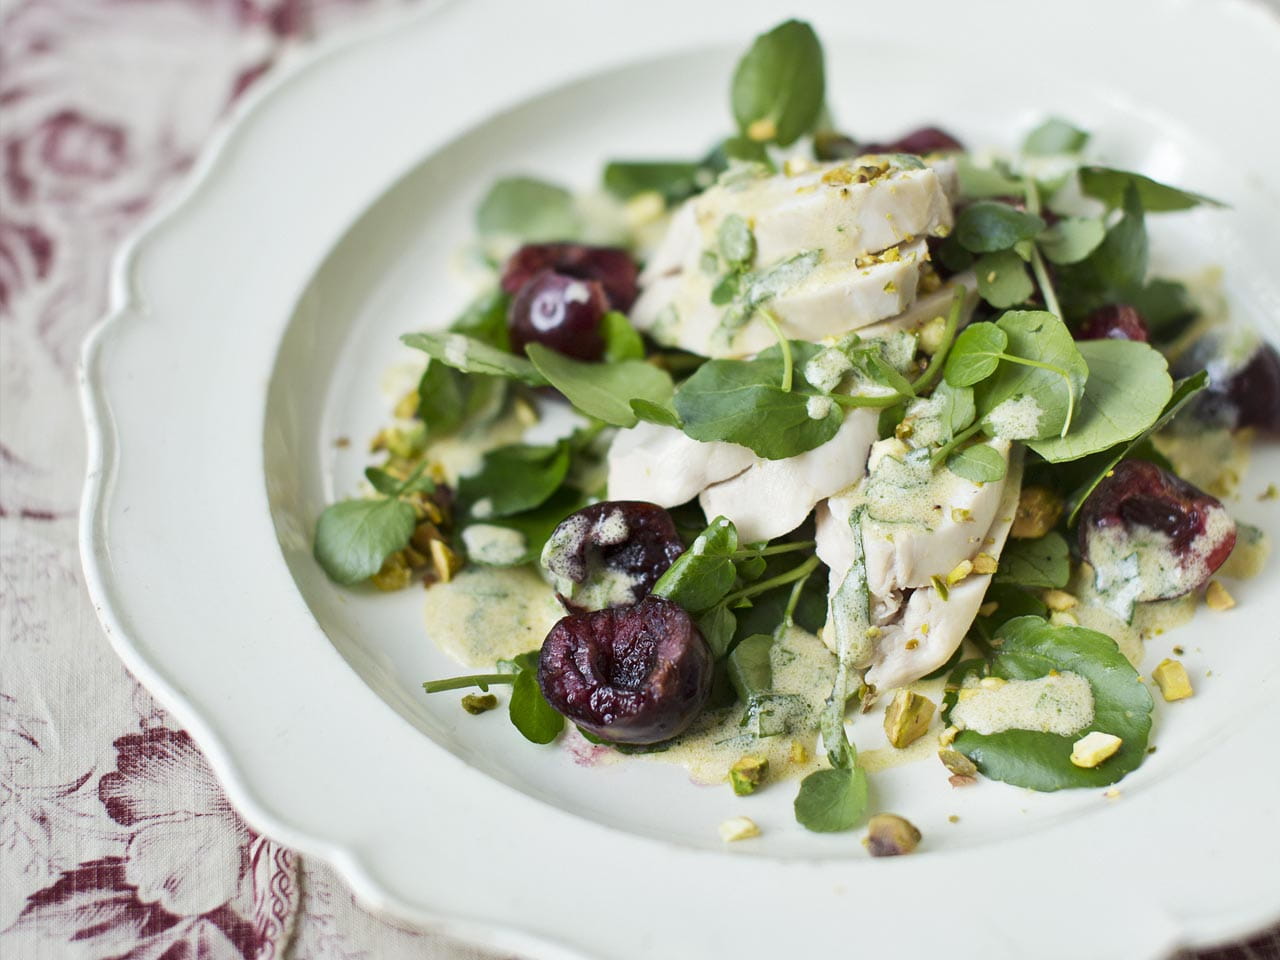 Chicken salad with cherries, watercress and tarragon dressing